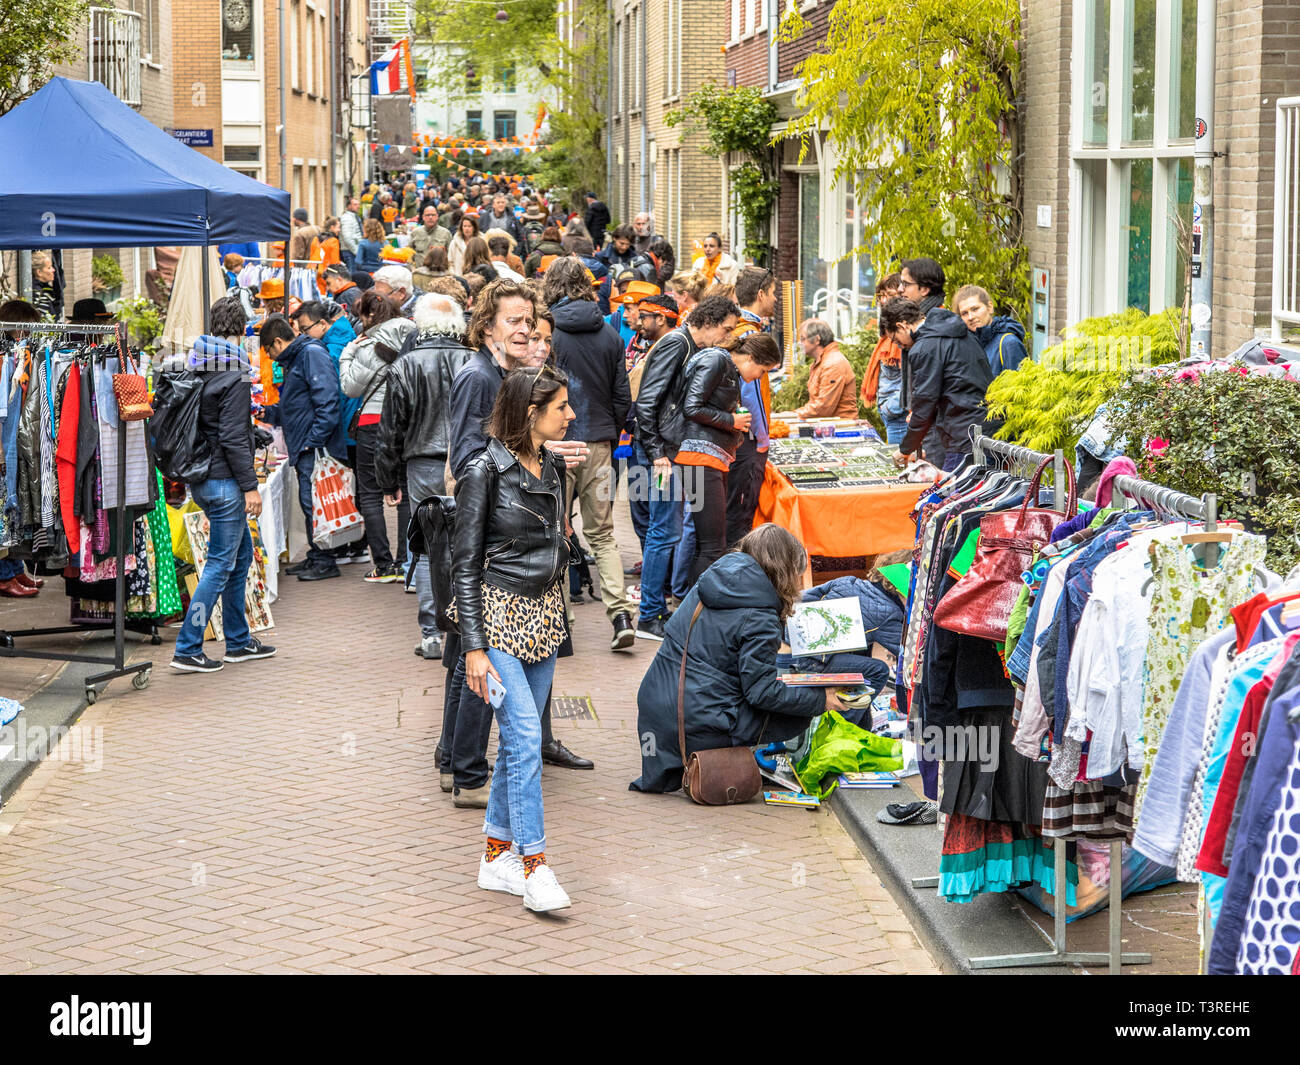 AMSTERDAM, THE NETHERLANDS - APRIL 27 2018: Crowd of people browsing on vrijmarkt flea market on annual Koningsdag. Birthday of the king. Stock Photo